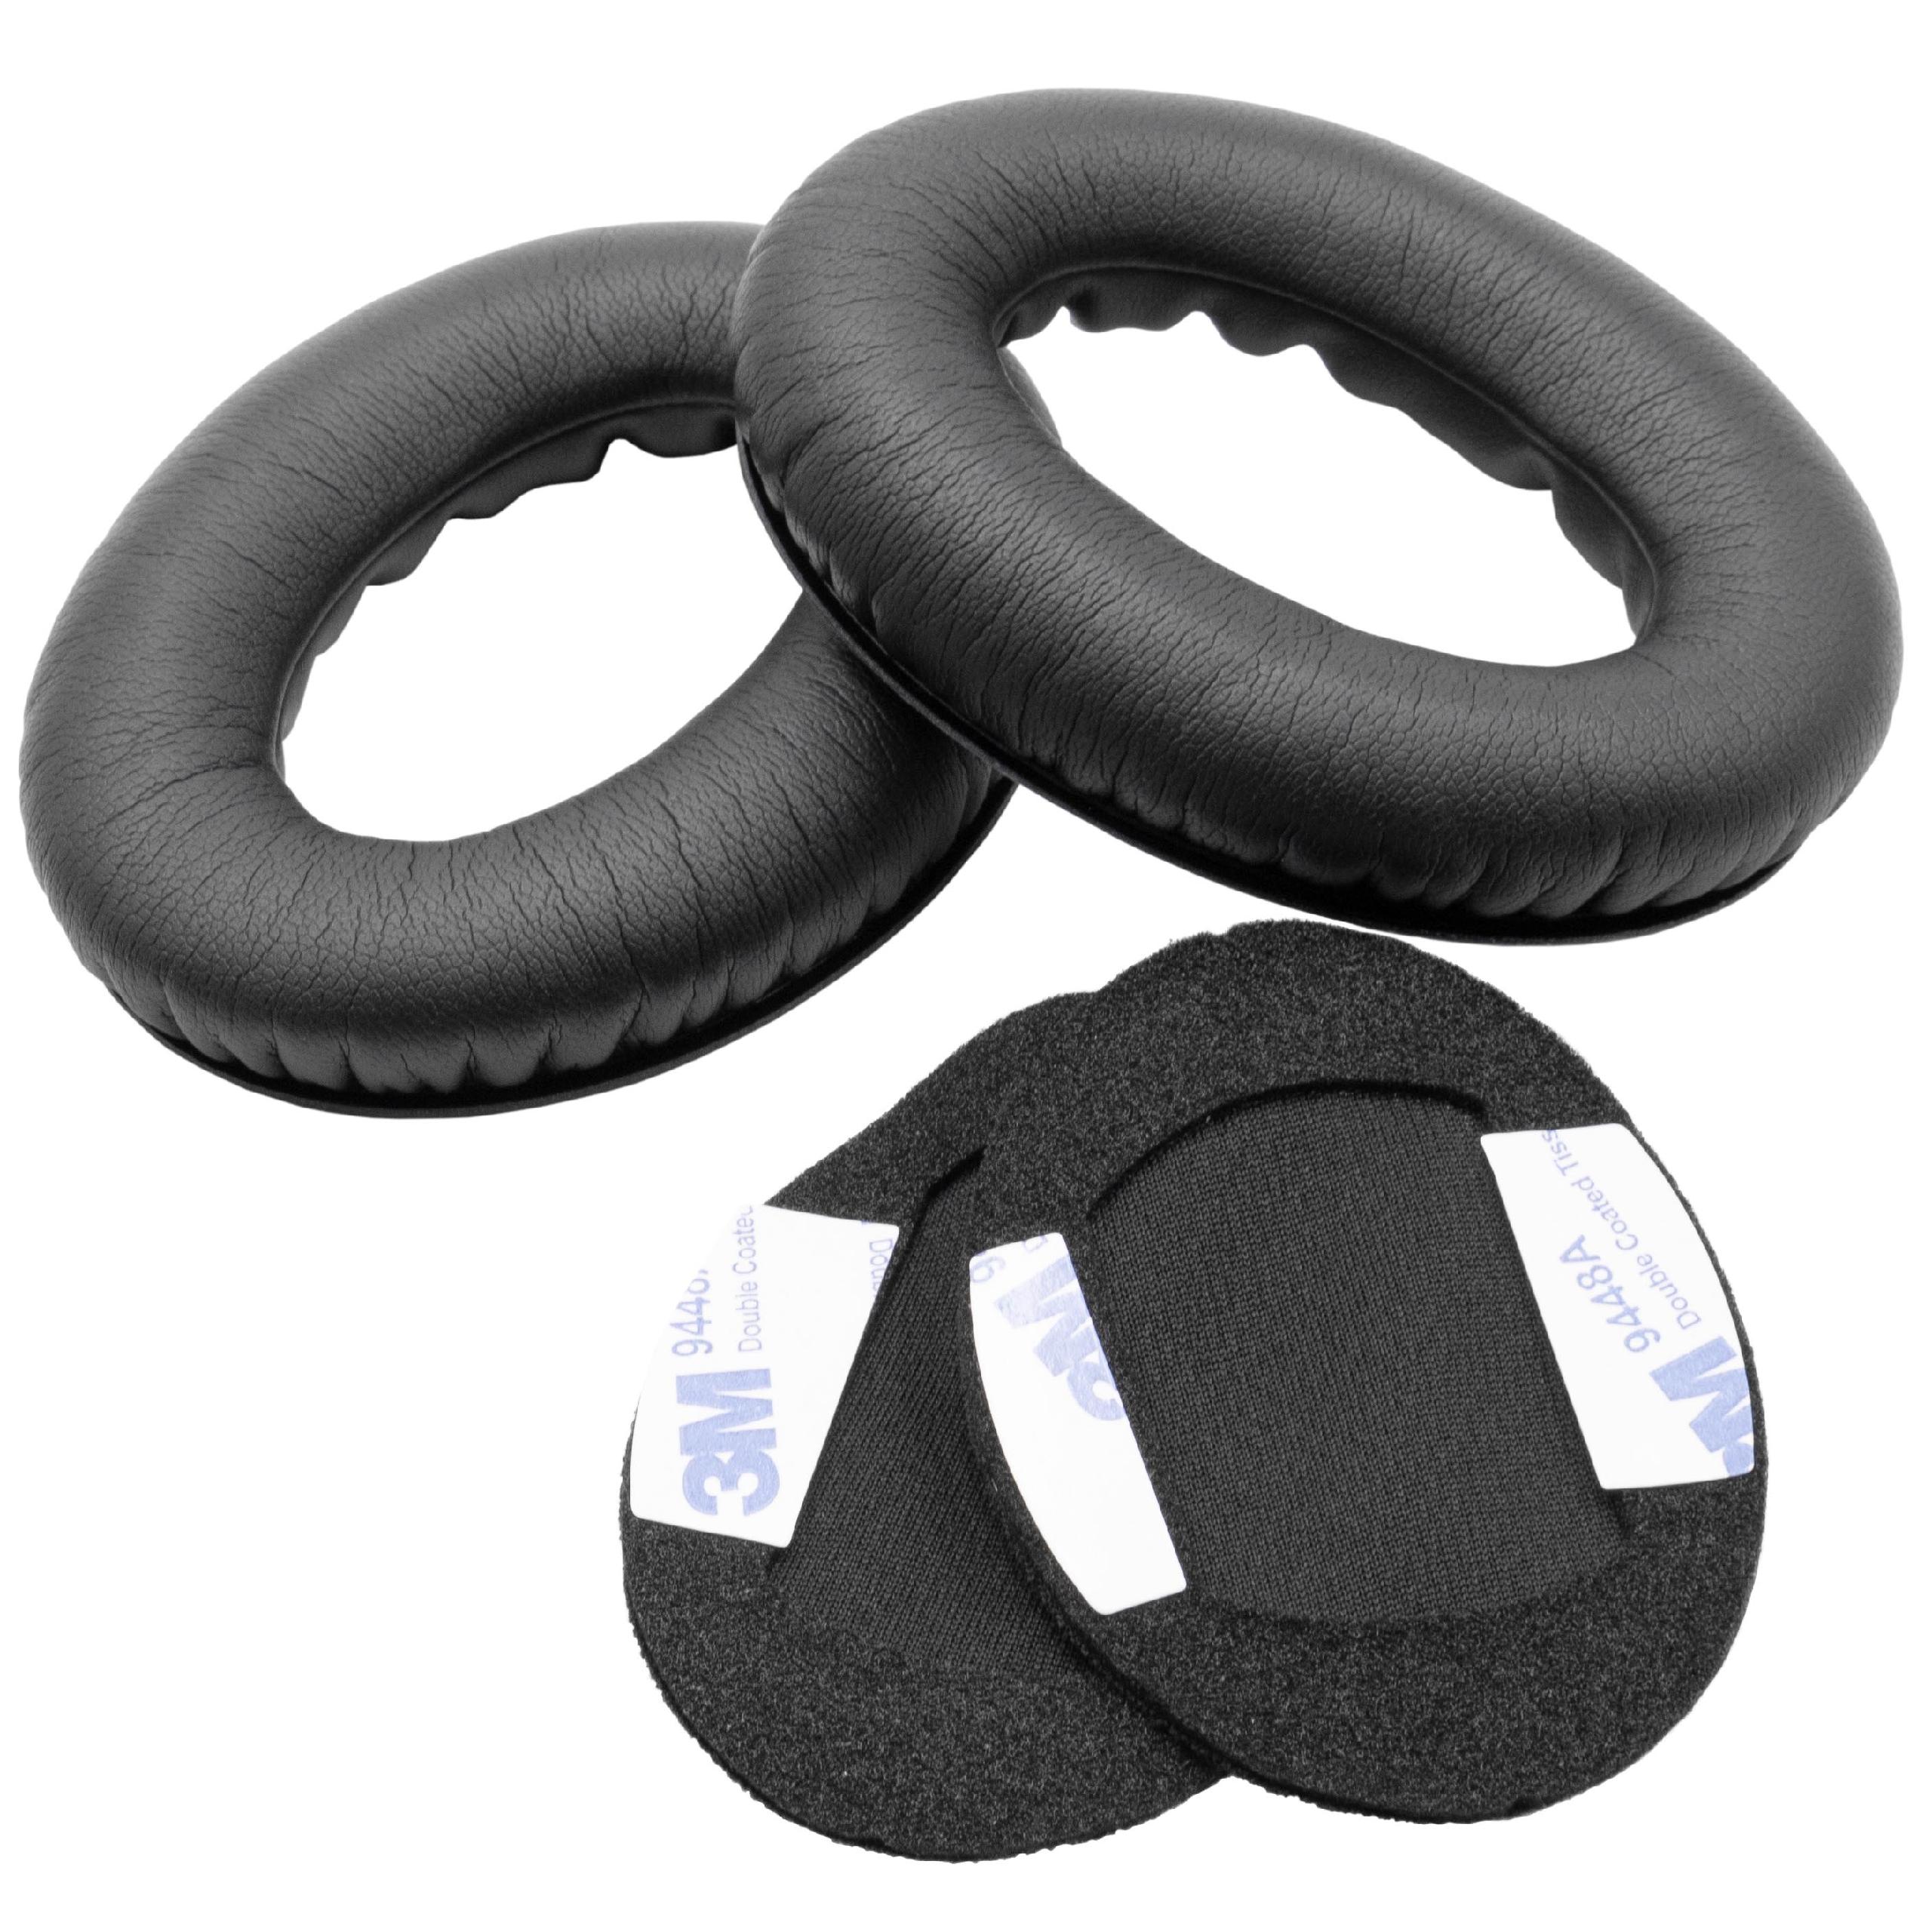 Ear Pads suitable for Bose Around-Ear Headphones etc. - polyurethane / foam, 13 mm thick